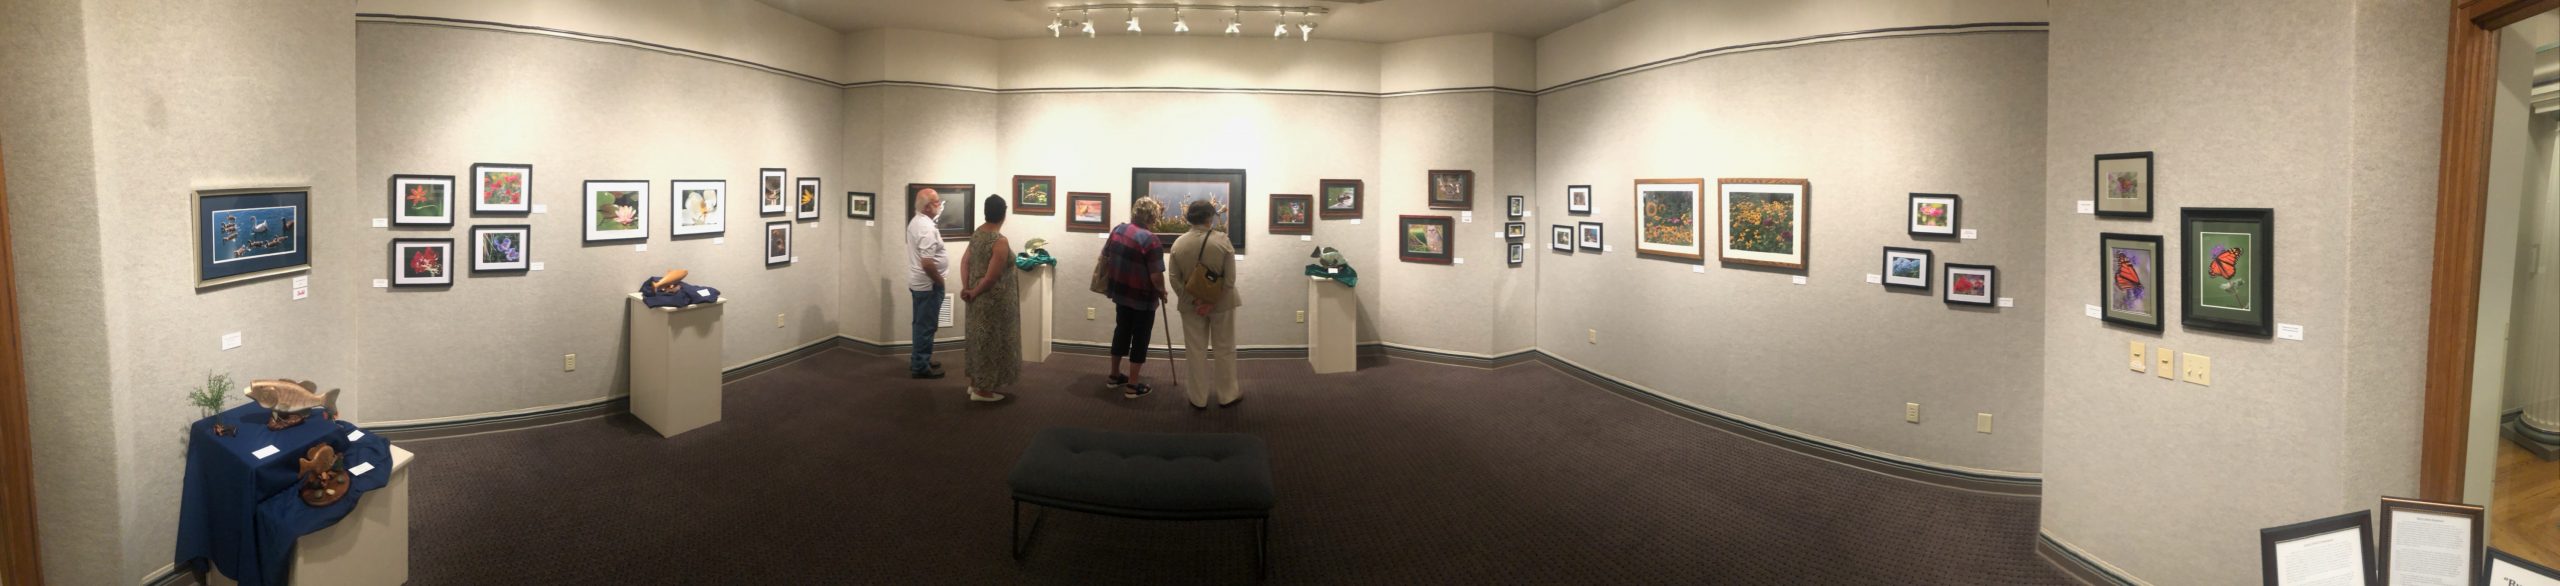 Panorama of Exhibit images and sculptures on display